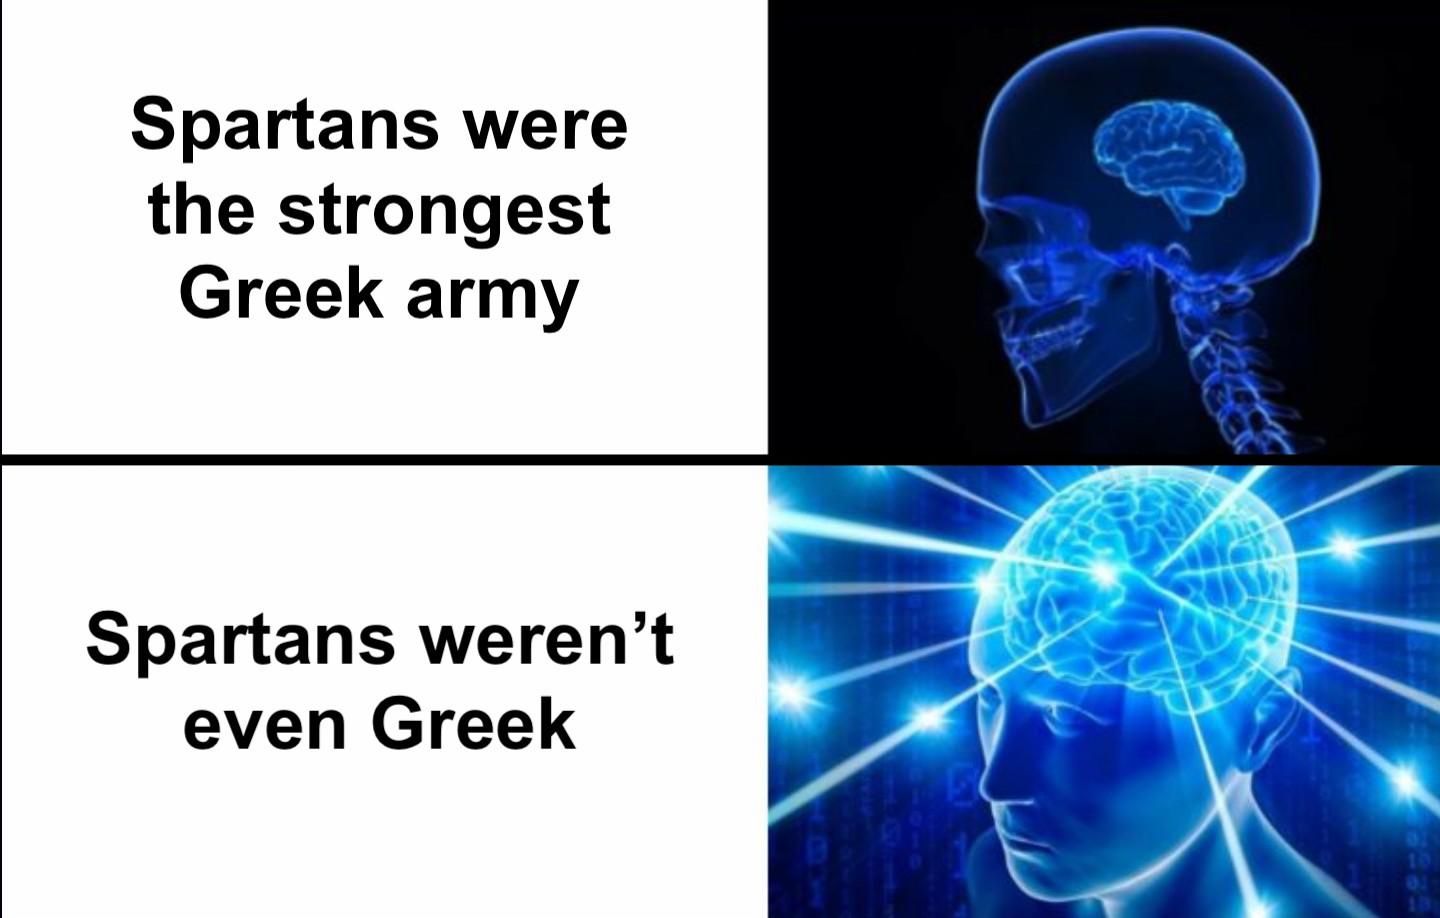 They turn the Greeks into Helots